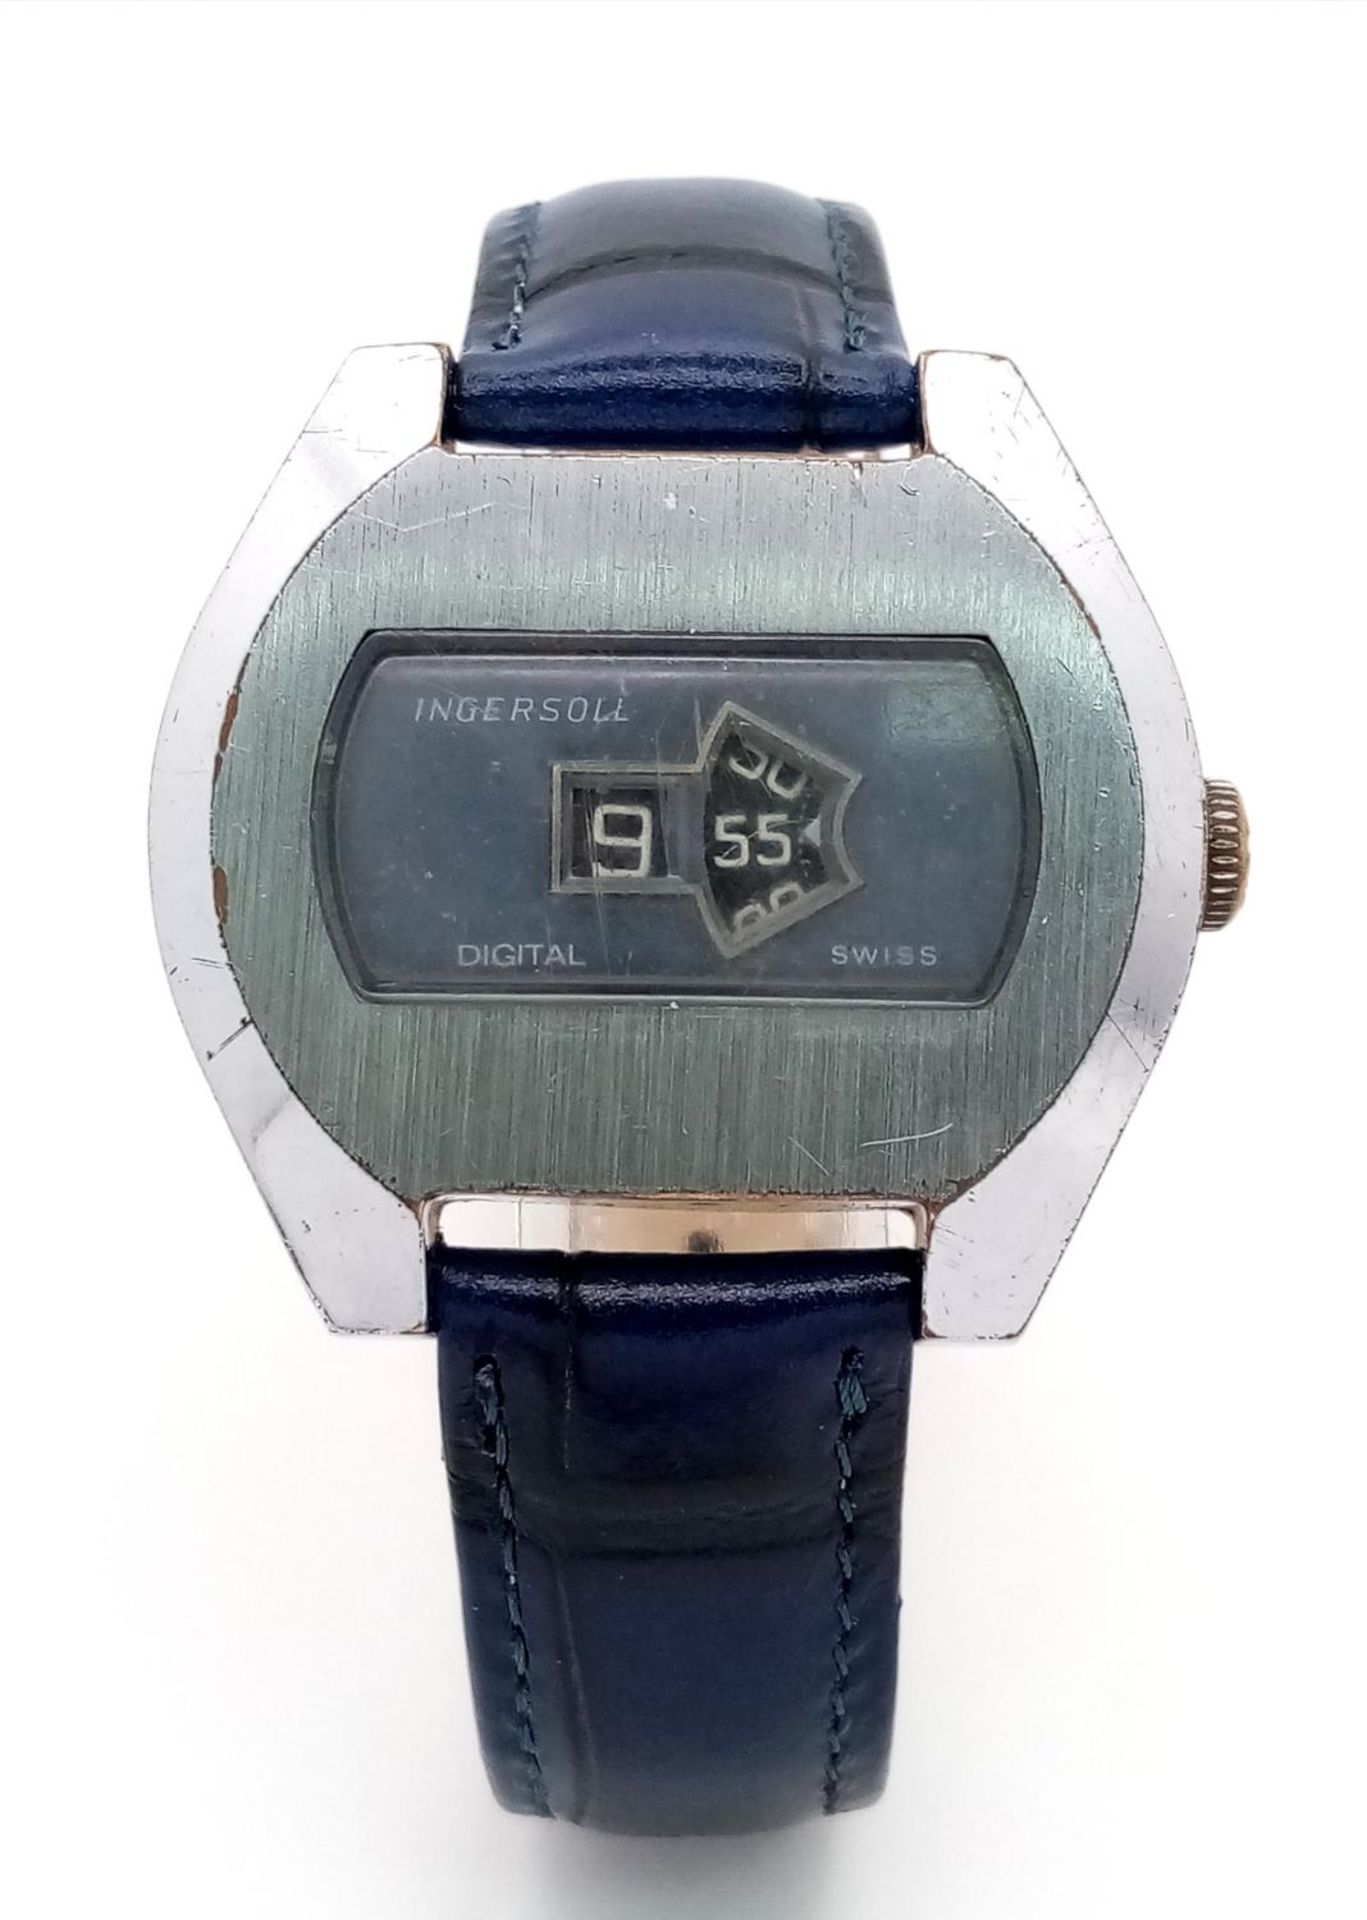 A Vintage Ingersoll Jump Watch. Blue leather strap. Stainless steel case - 38mm. Metallic grey - Image 2 of 6